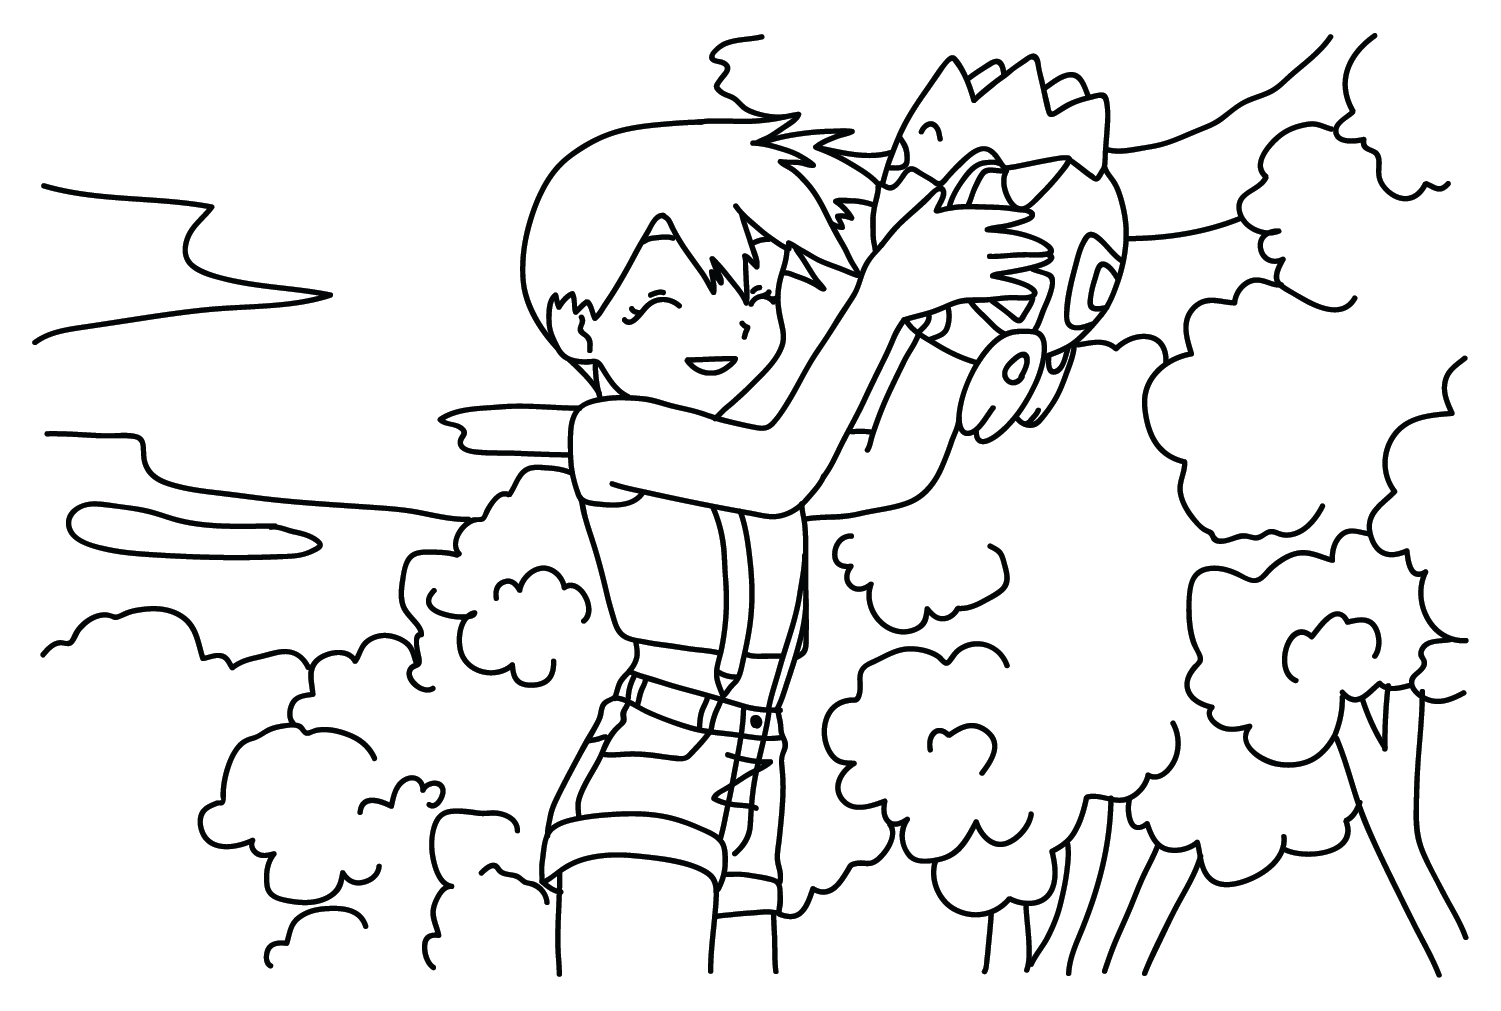 Misty Coloring Pages to Printable from Misty